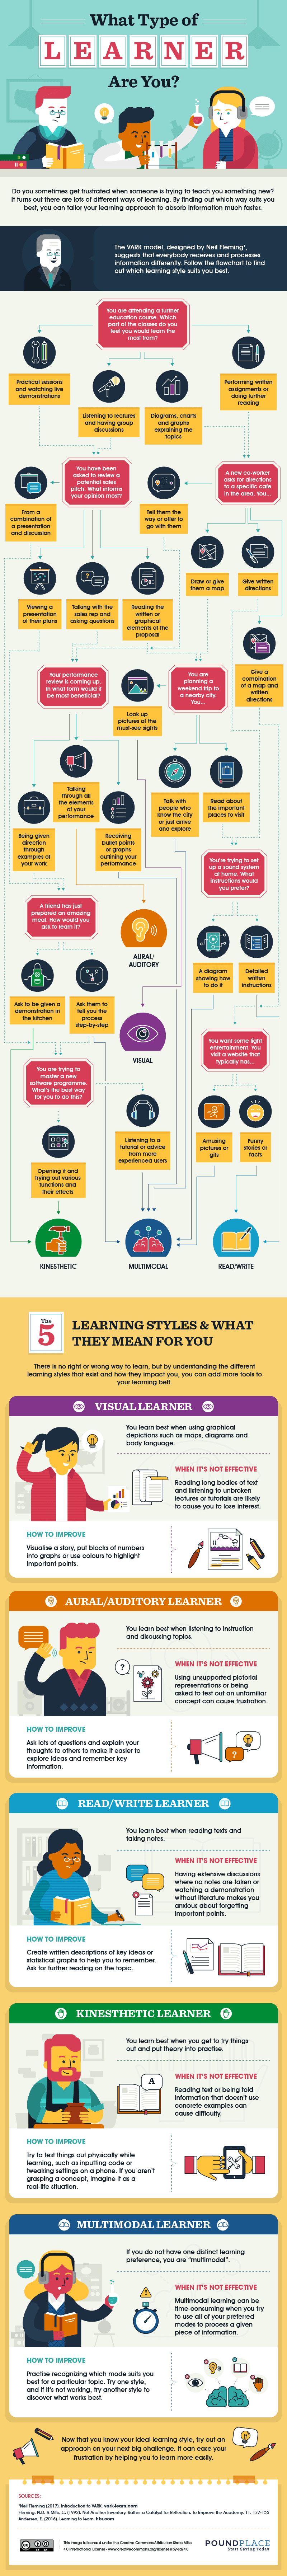 Do You Know What Kind Of Learner You Are? - #infographic